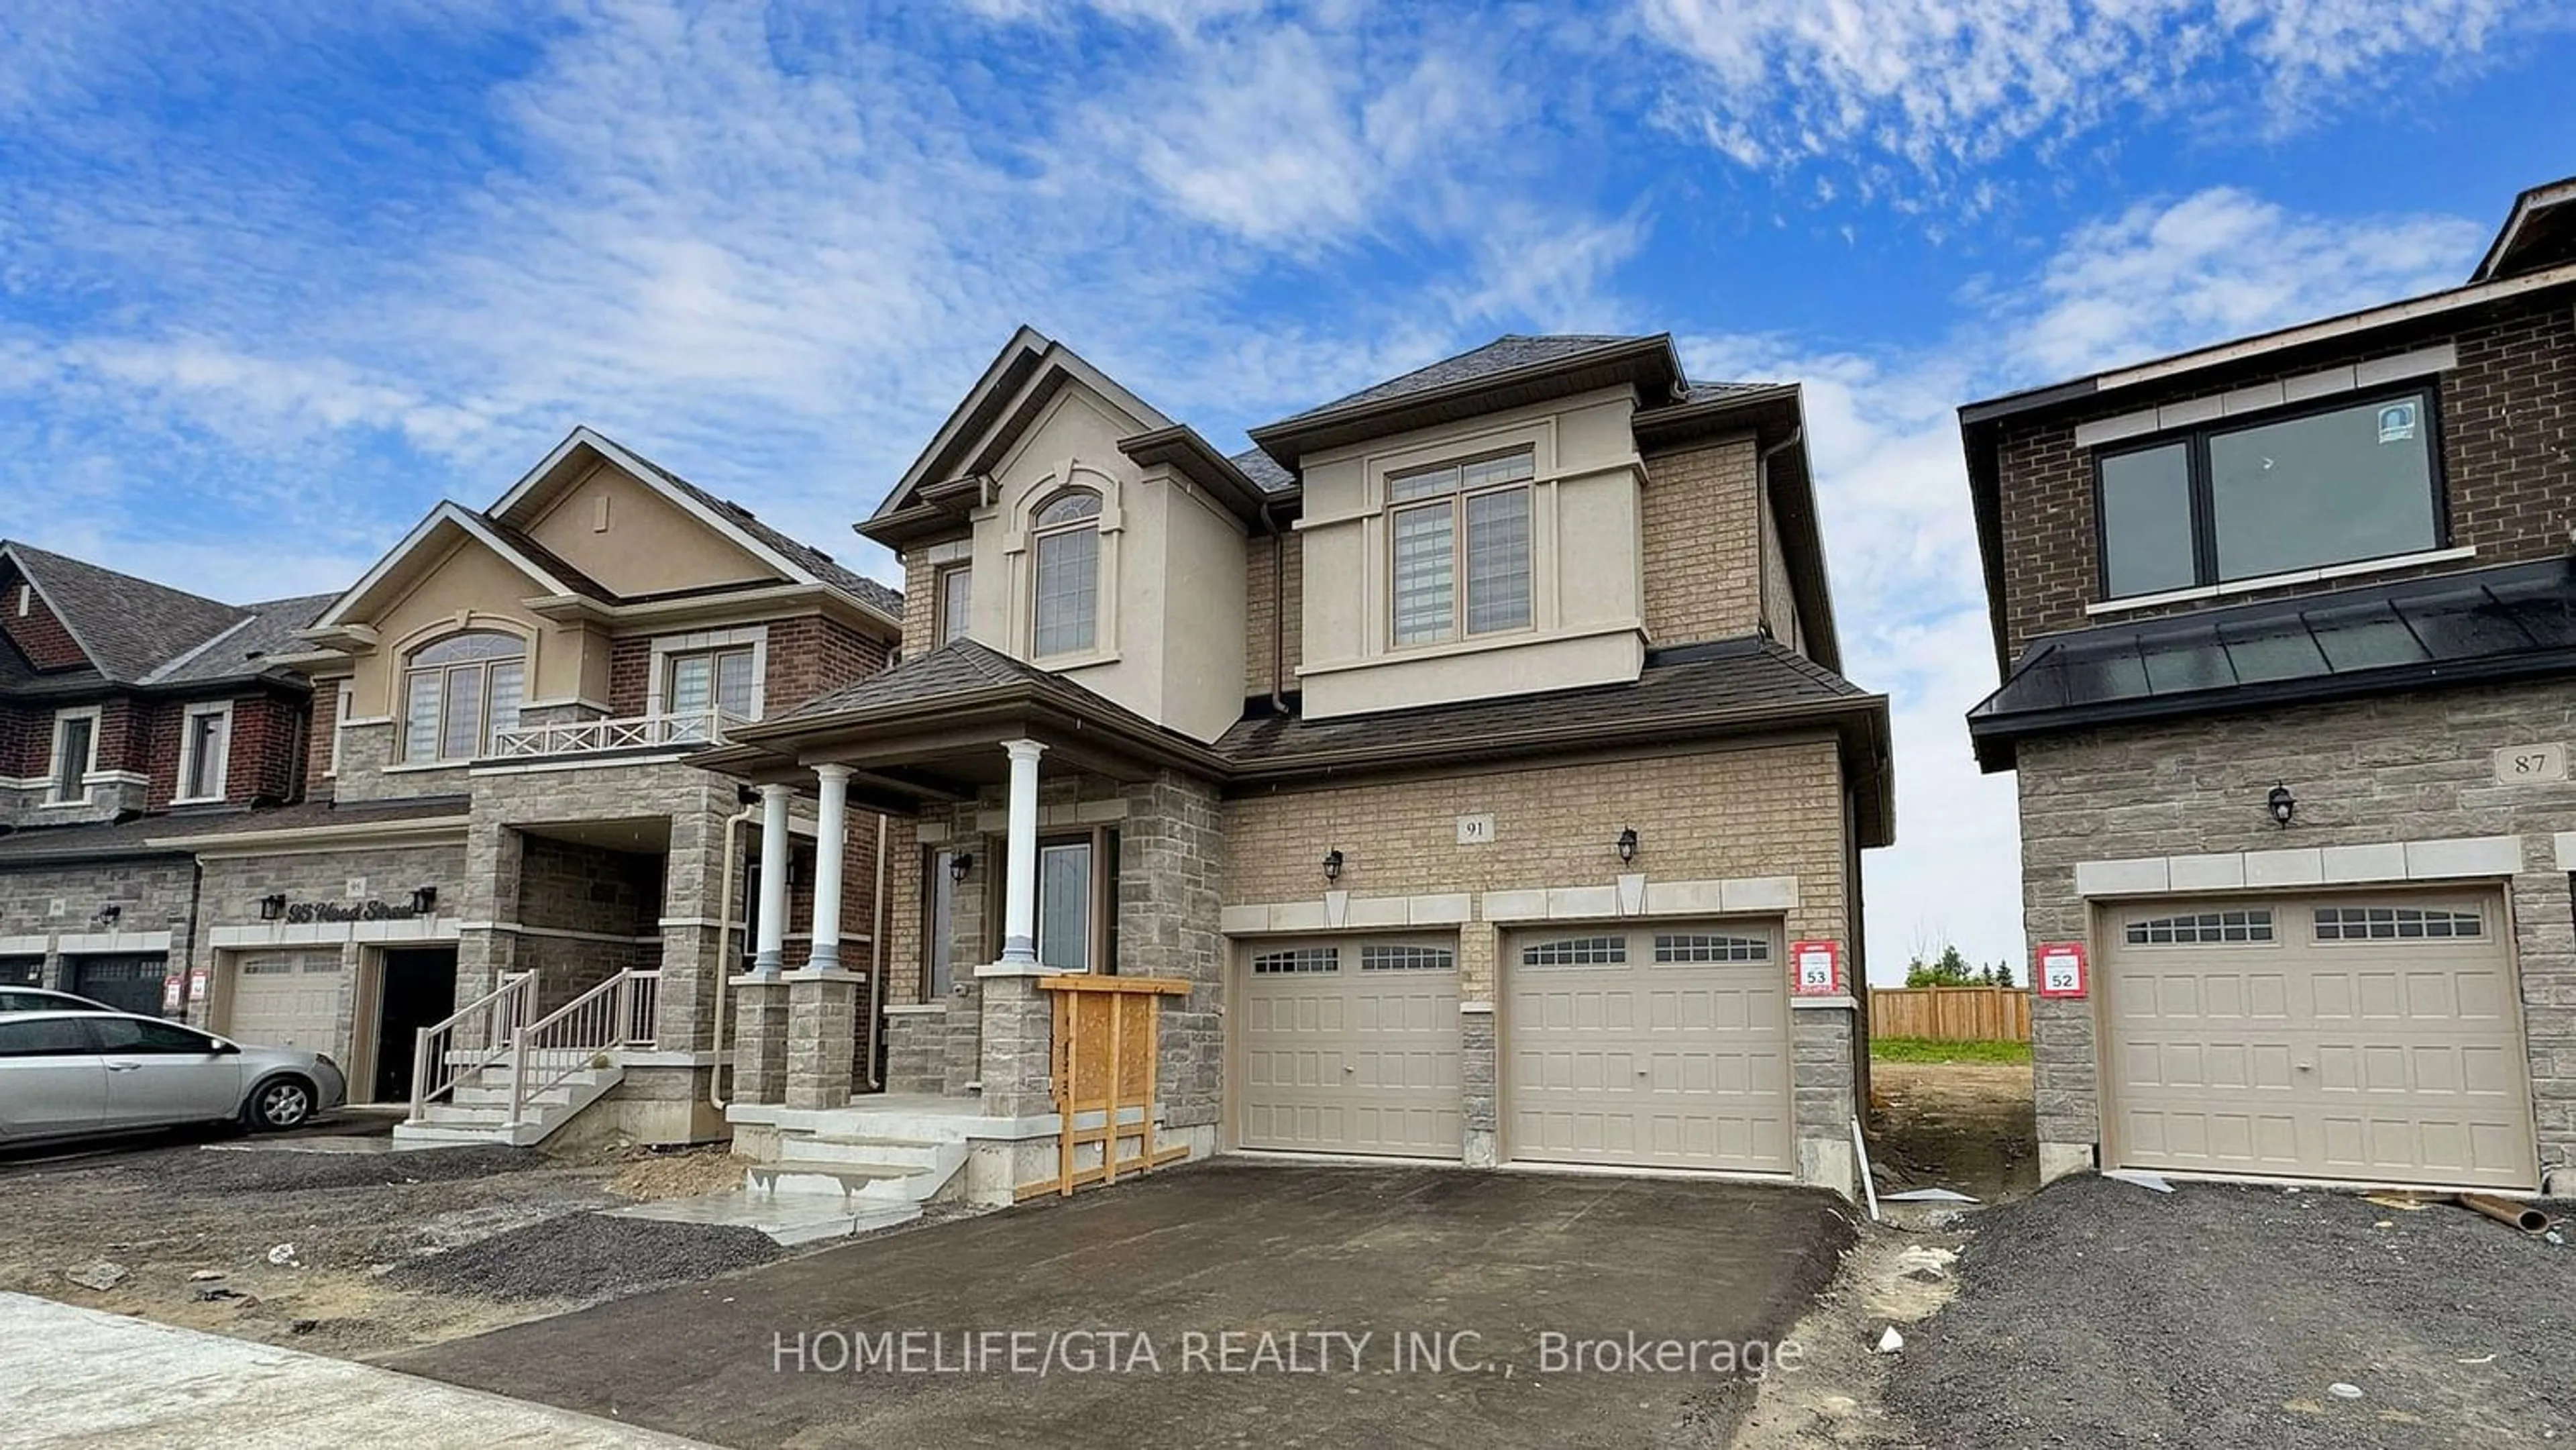 Frontside or backside of a home for 91 Hoad St, Clarington Ontario L1B 0W4